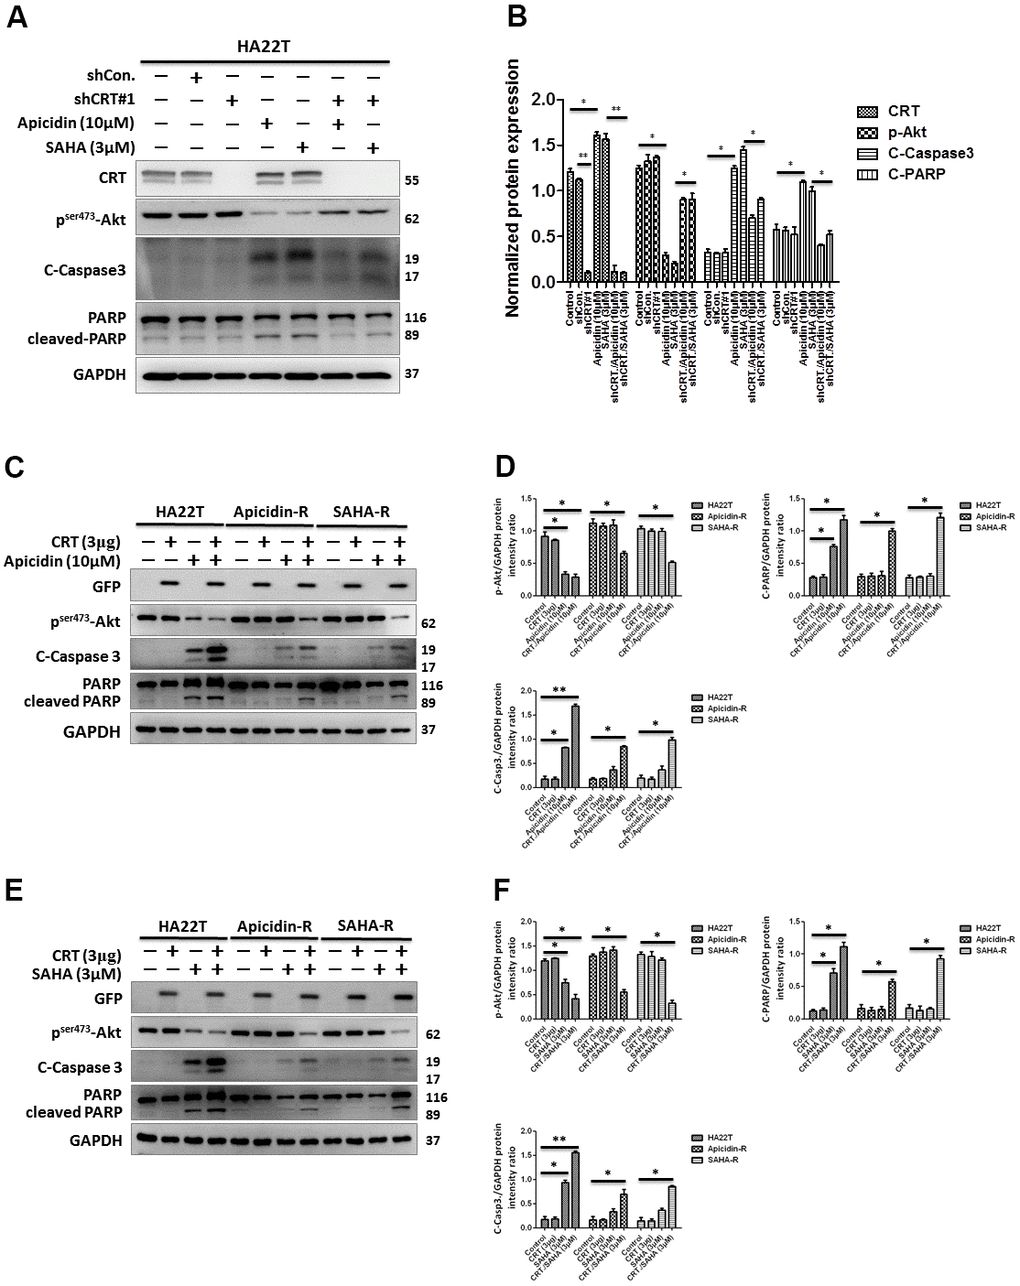 Effect of overexpression and downregulation of CRT overexpression on cell apoptosis in HCC cells treated with HDAC inhibitors. (A, B) shRNA-mediated knockdown of CRT enhances drug-resistance in HDAC inhibitor-treated cells than in HA22T parental cells. (C–F) Overexpression of CRT overexpression enhances HDAC inhibitor-induced chemosensitivity in HDAC inhibitor-resistant cells than in parental cells. All protein samples are analyzed using western blotting. Protein expression is normalized to expression of GAPDH. *p p p